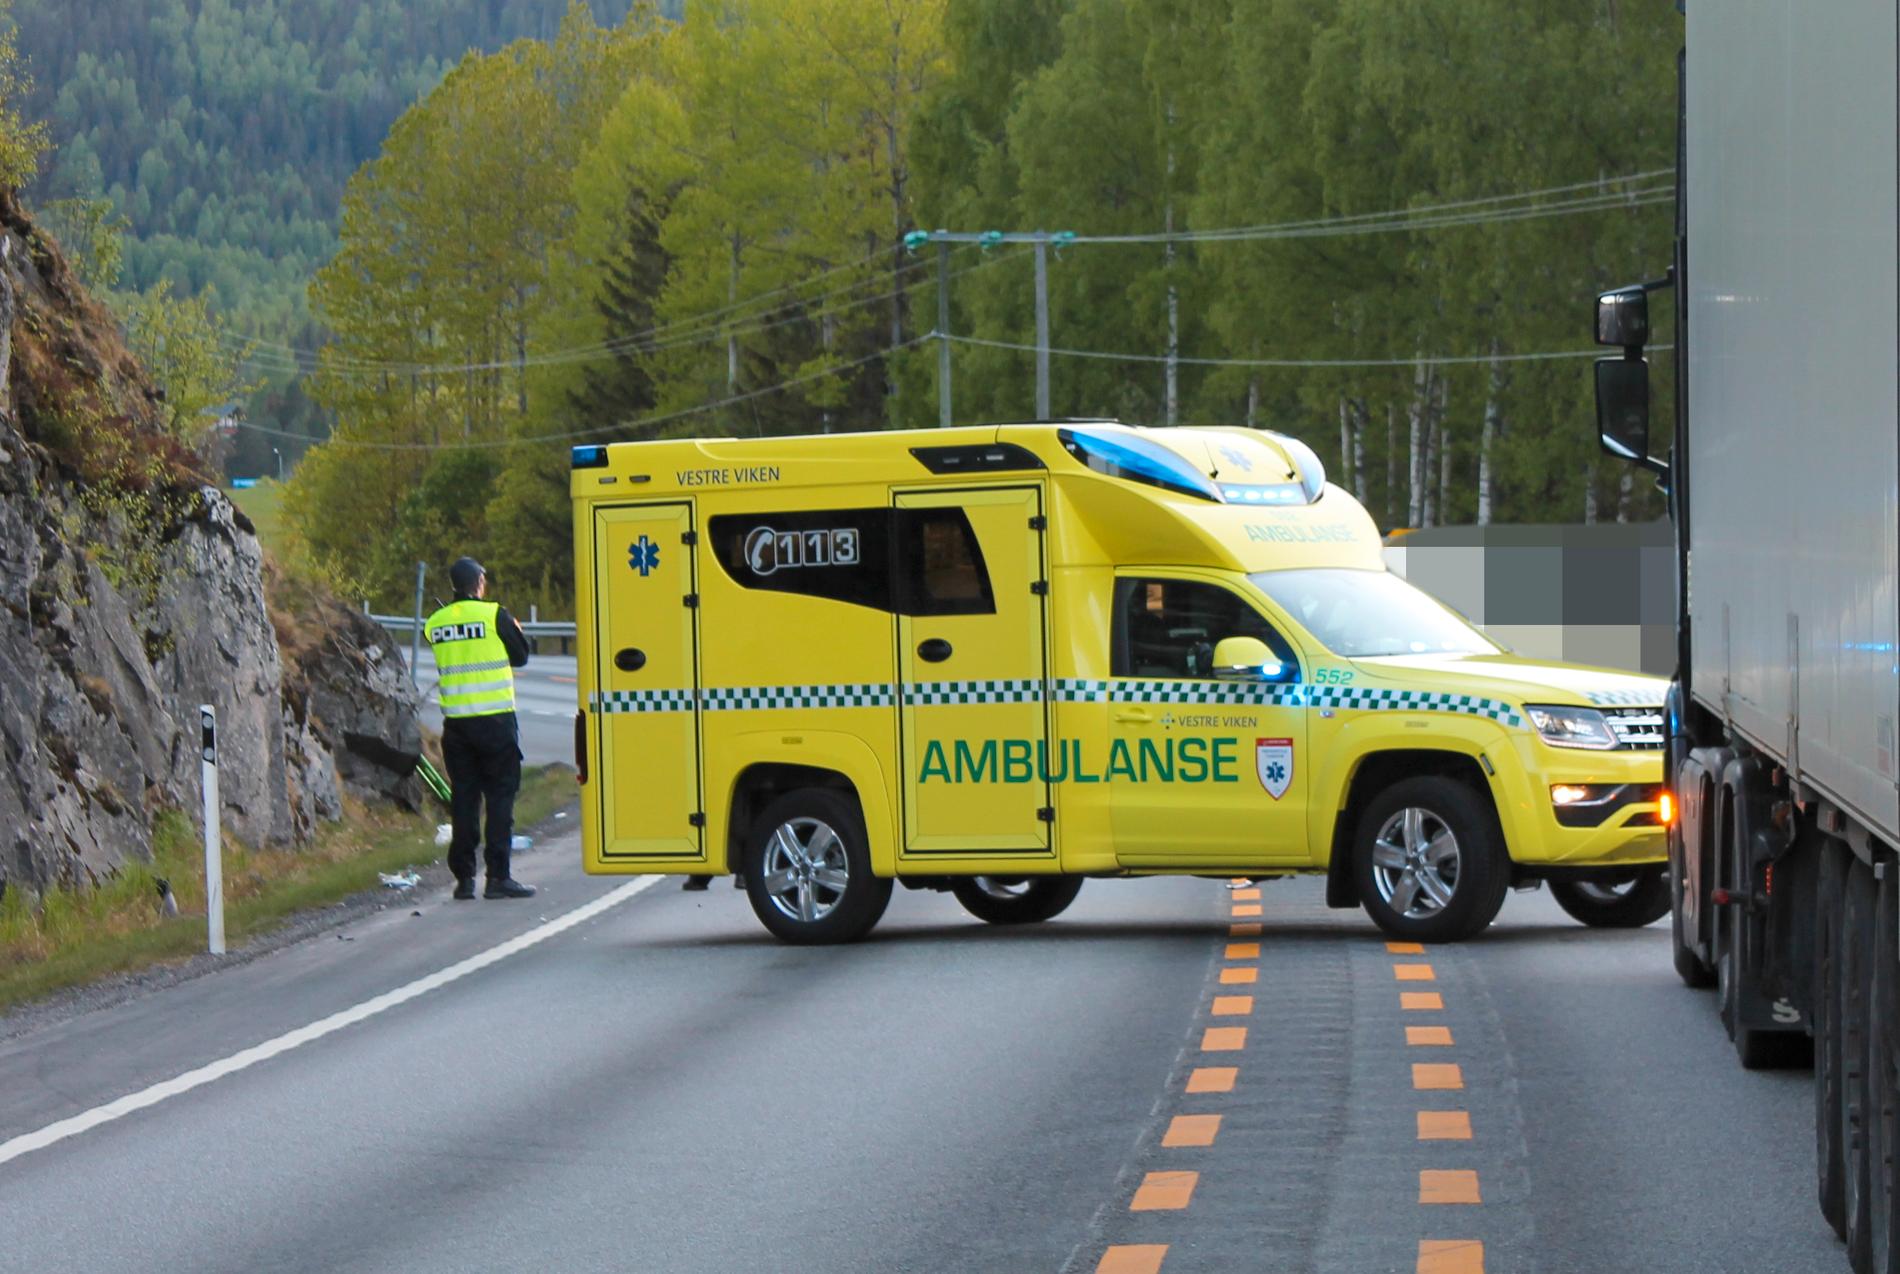 One person dies in frontal collision in Flå – VG